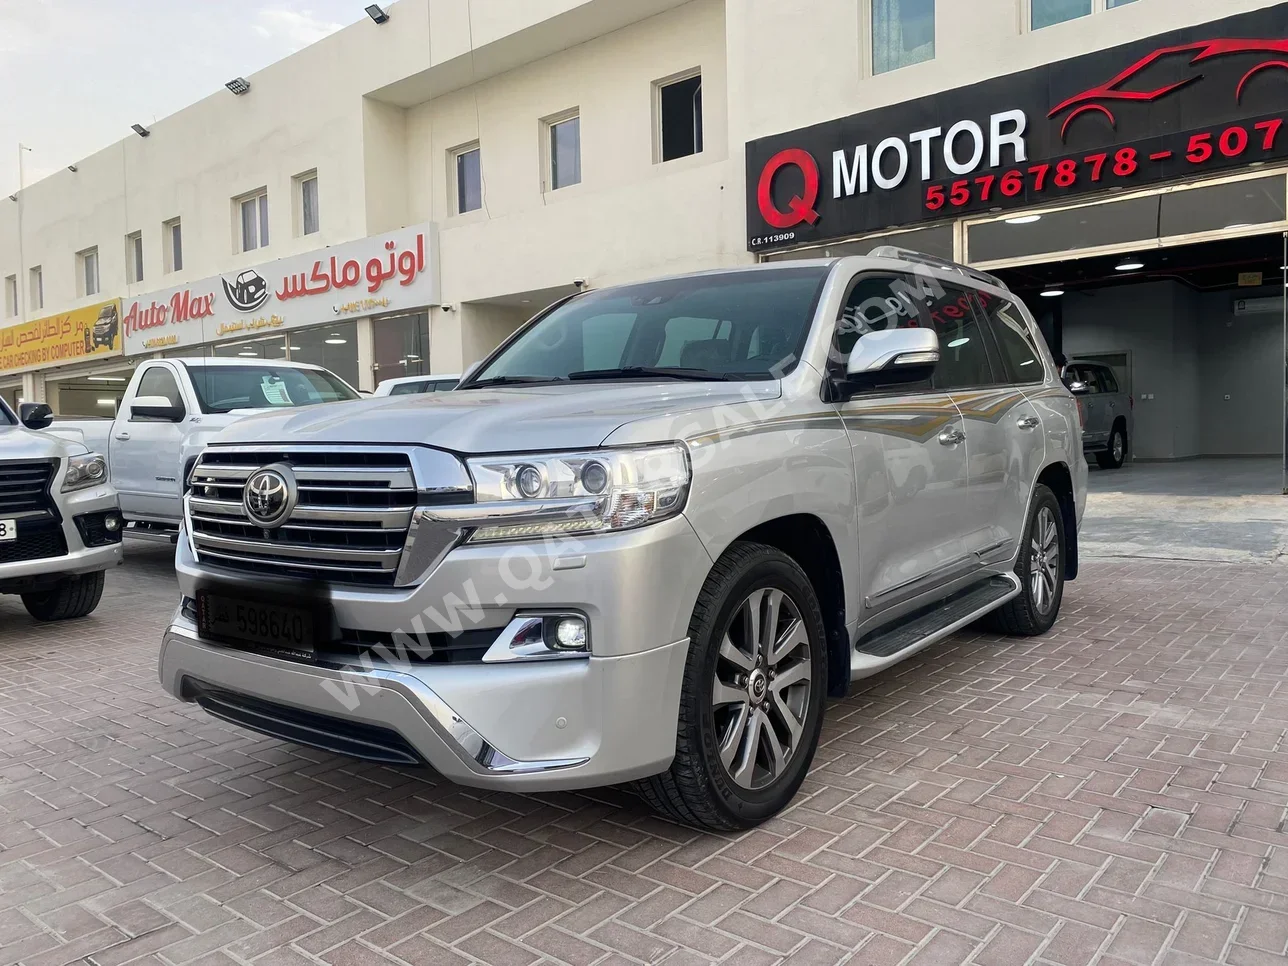 Toyota  Land Cruiser  VXS  2016  Automatic  267,000 Km  8 Cylinder  Four Wheel Drive (4WD)  SUV  Silver